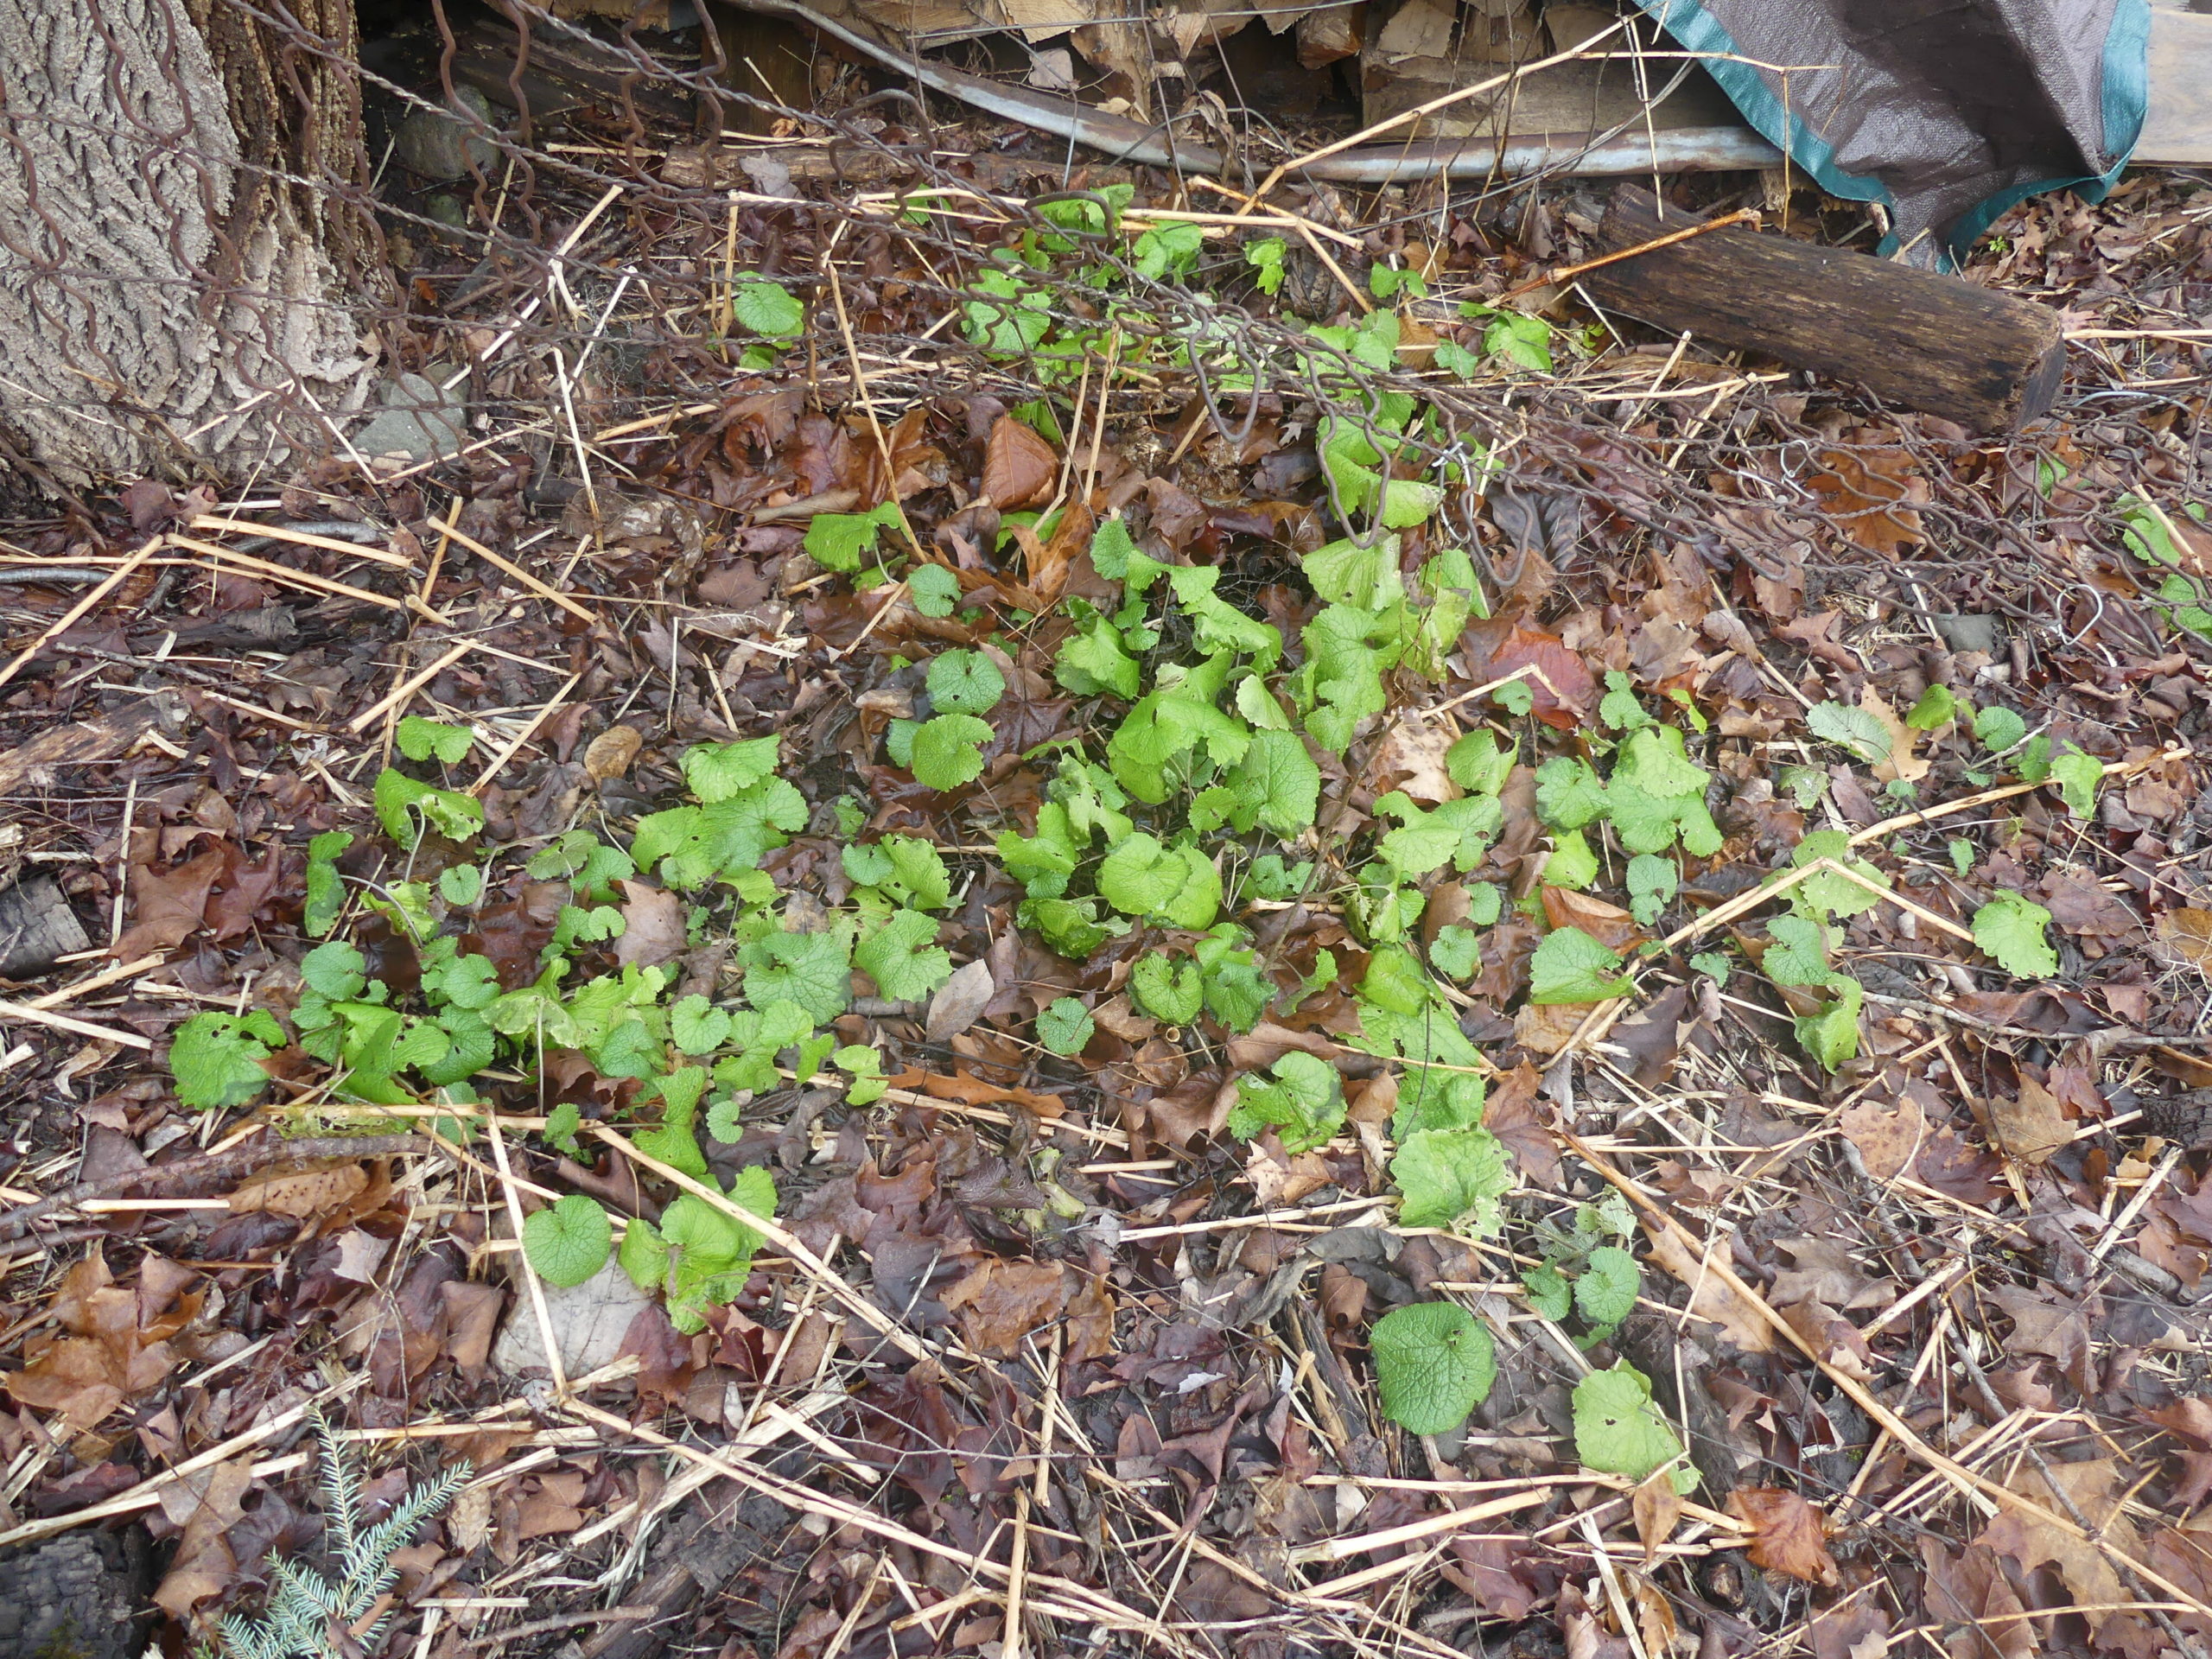 Garlic mustard tries to invade along a property line and, if left, will flower in the spring with each plant shooting out hundreds of seeds.